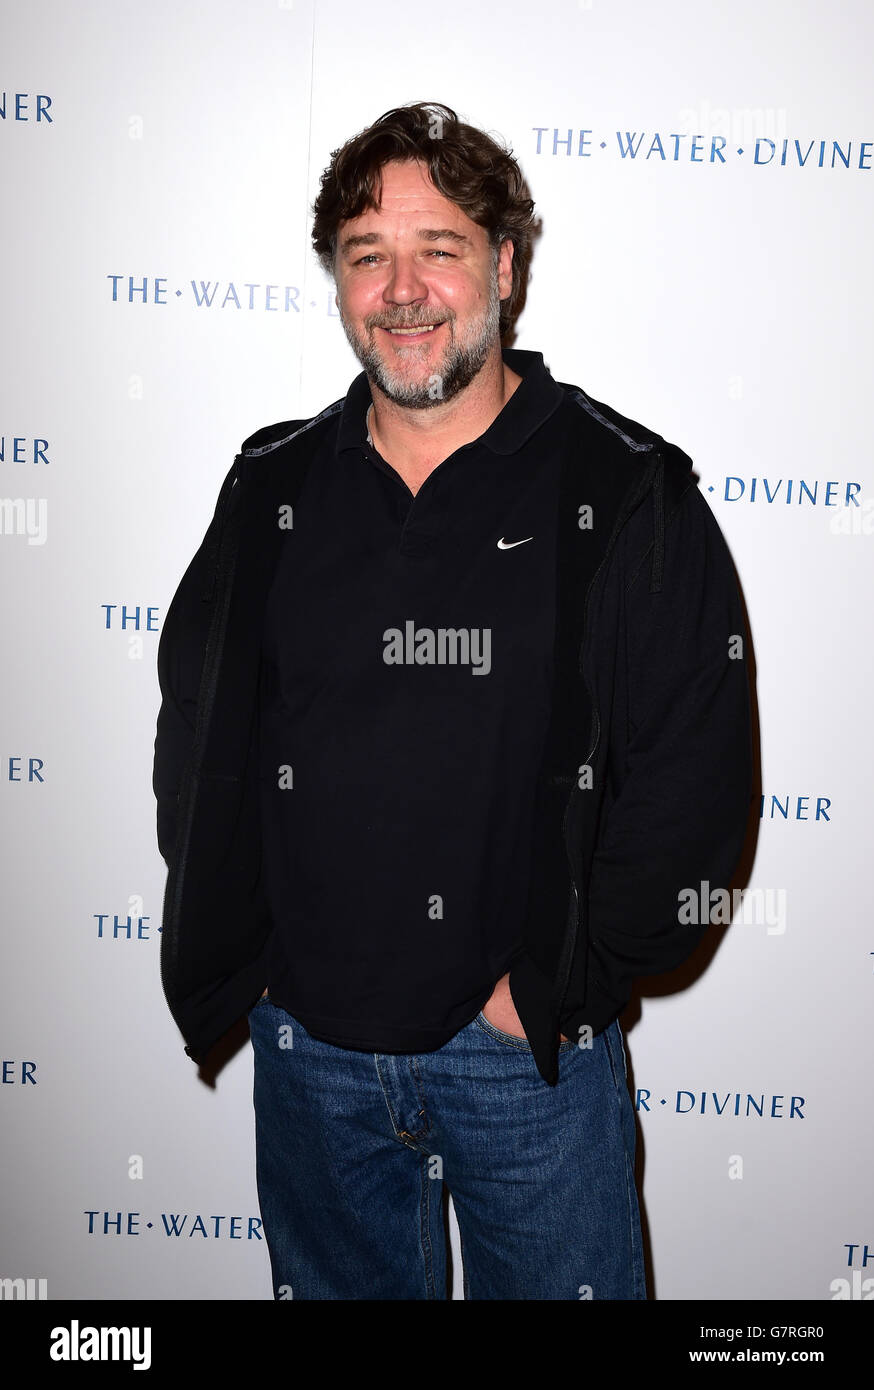 The Water Diviner - London. Russell Crowe attends a press conference for new film The Water Diviner at Claridges, London. Stock Photo